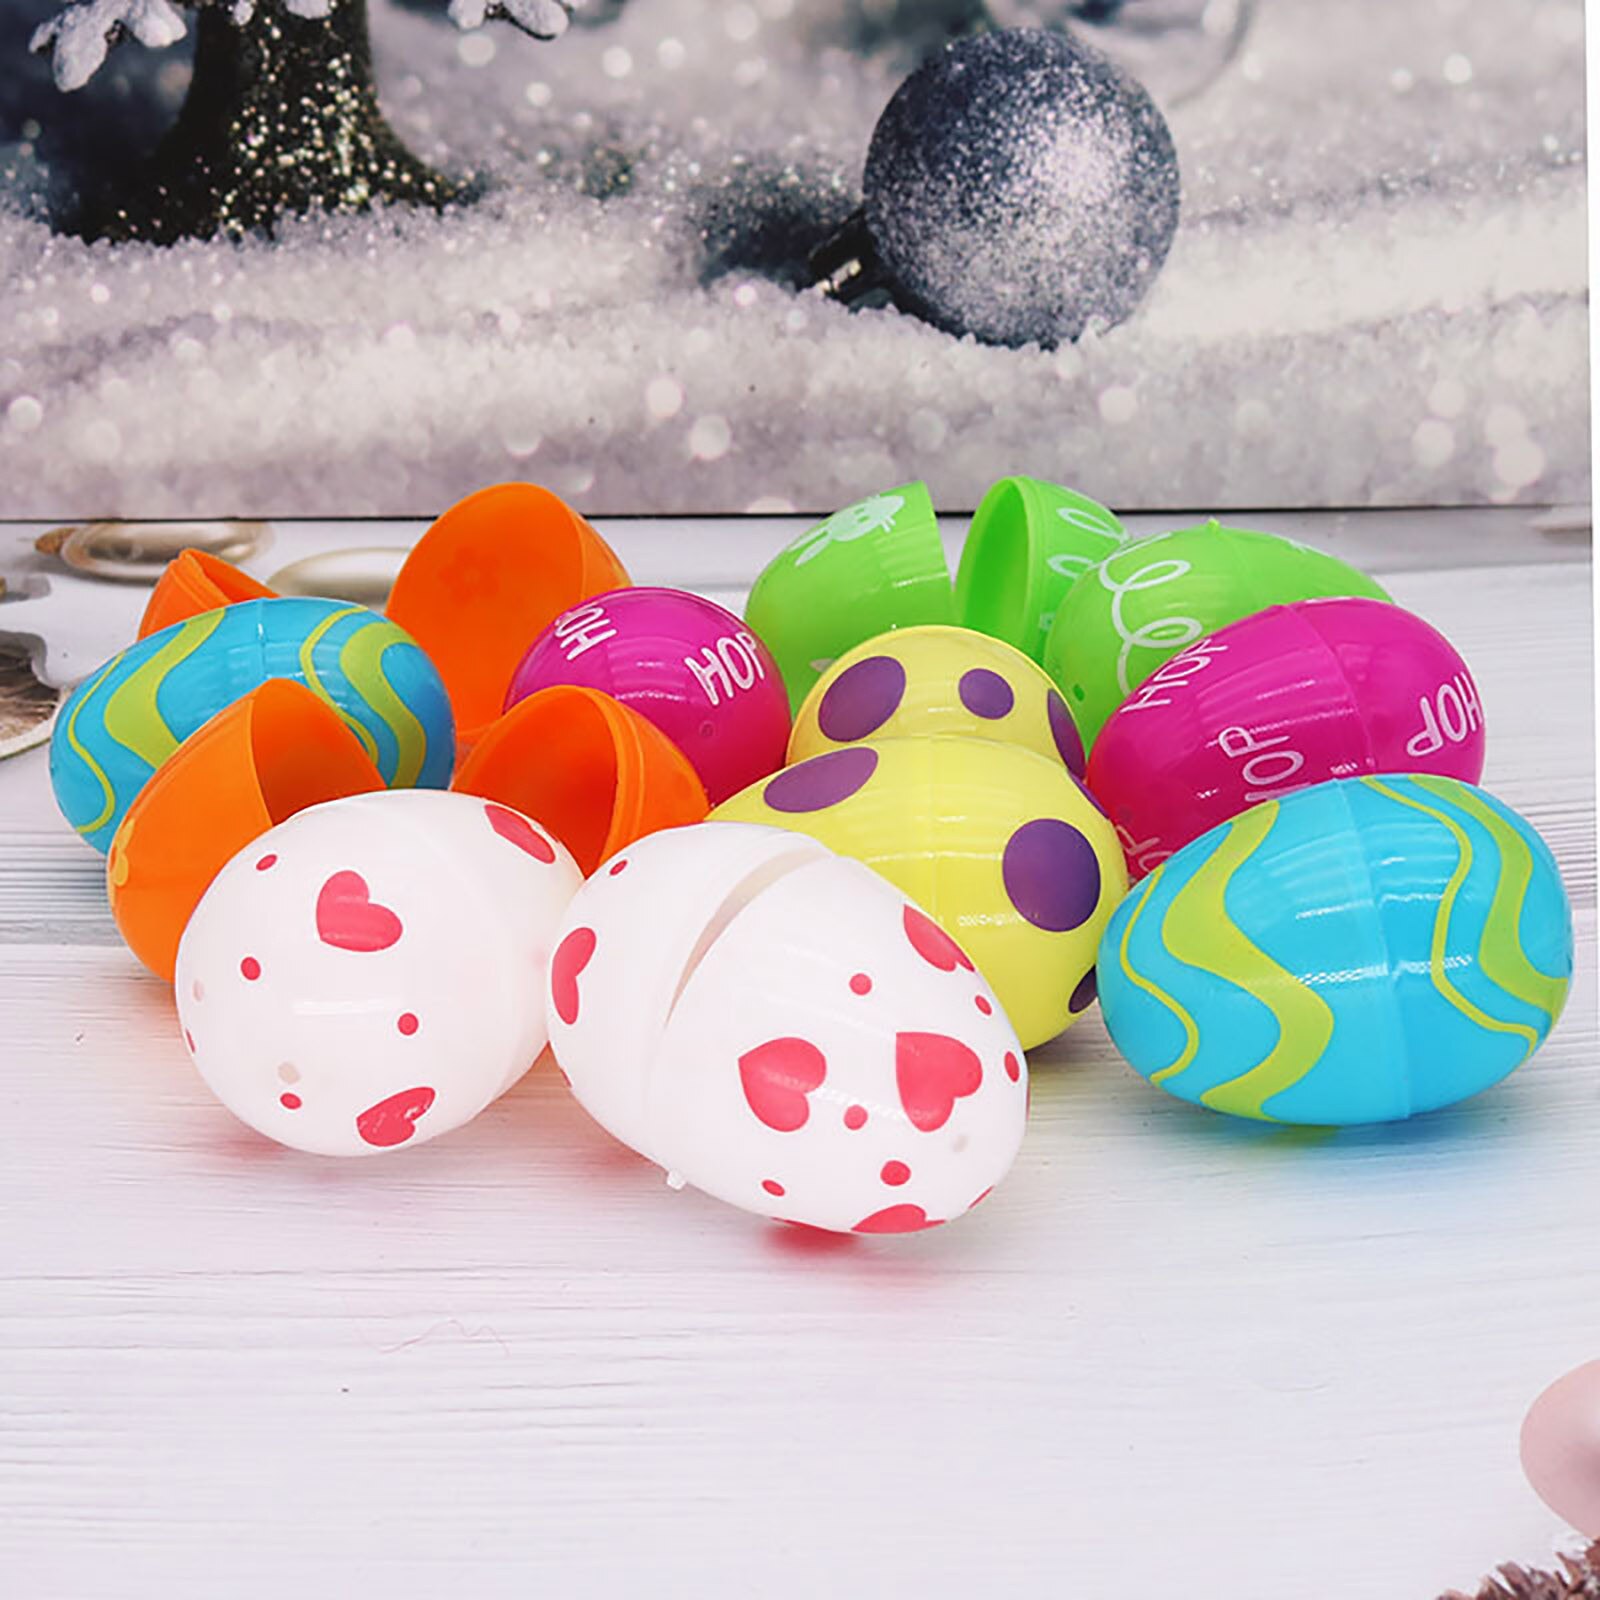 12pc Fillable Plastic Easter Eggs Hunt Party Supply Pack Assorted Pattern Prints Boy Girl Toy Children's Toys Birthday #03